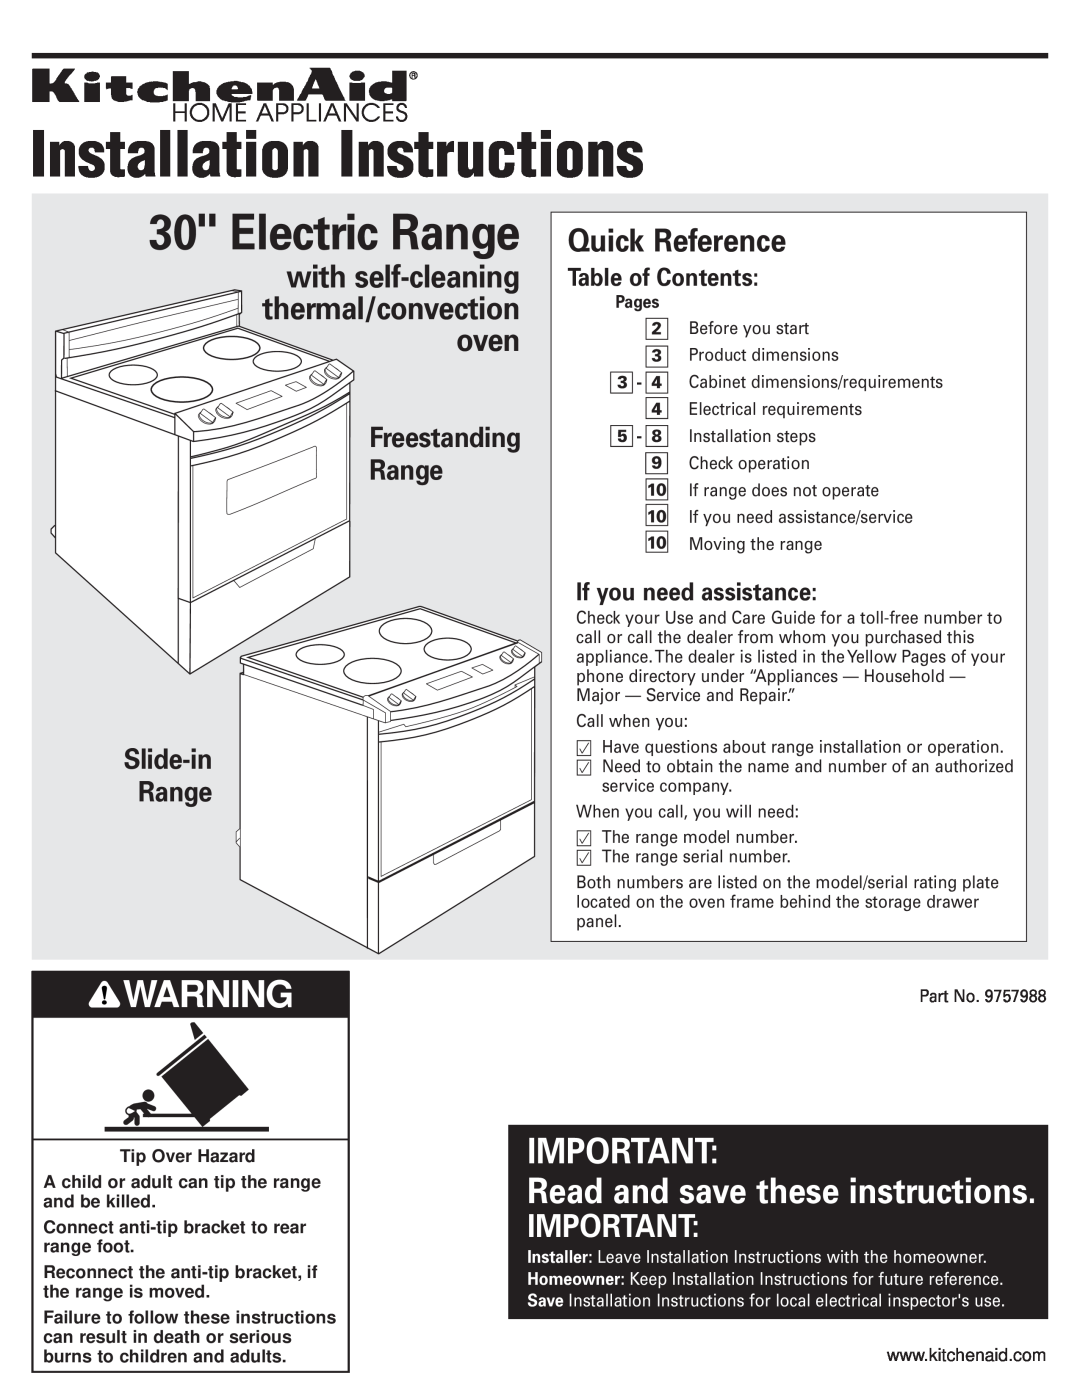 KitchenAid Convection Oven installation instructions Table of Contents, If you need assistance, Pages, Electric Range 